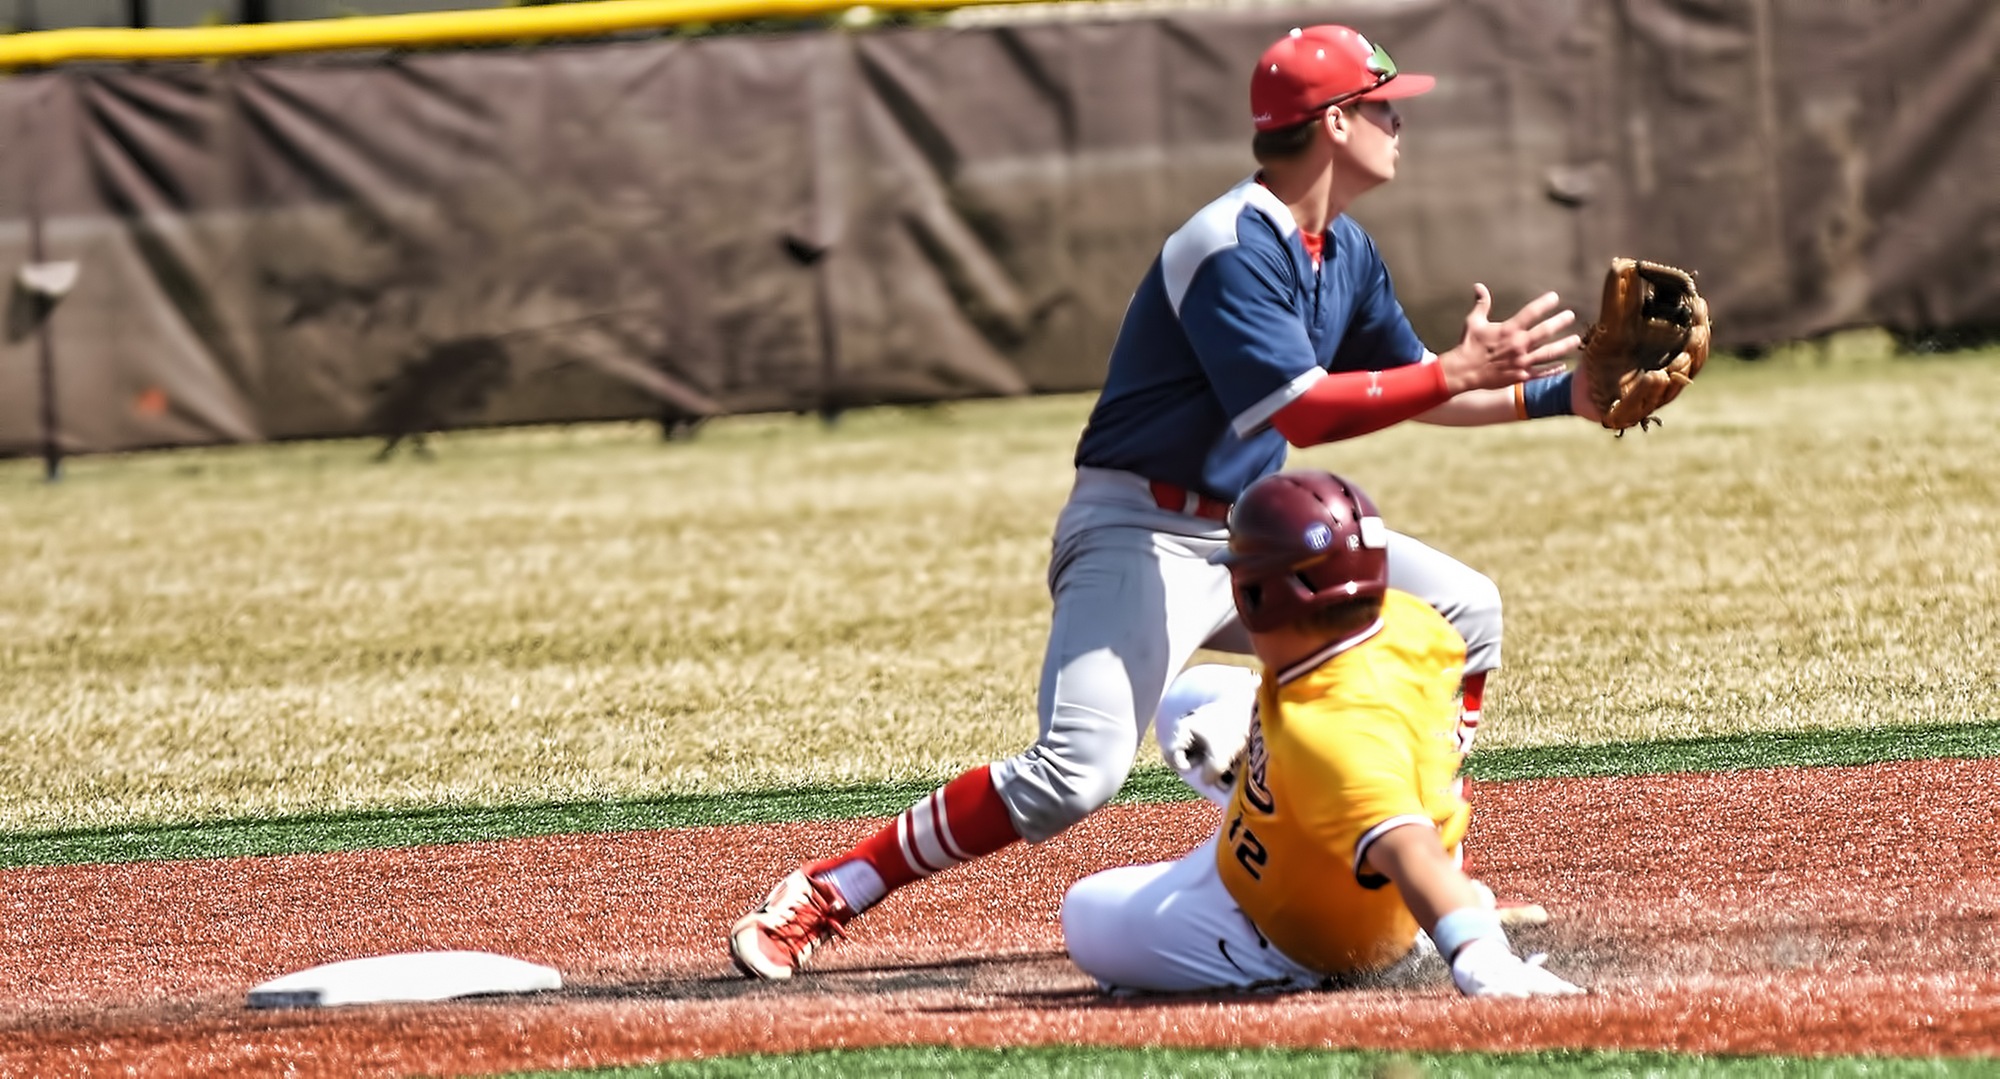 Concordia rallied from a 7-3 deficit in the ninth inning and beat St. Mary's 9-7 in the 11th inning in Wheaton, Ill.